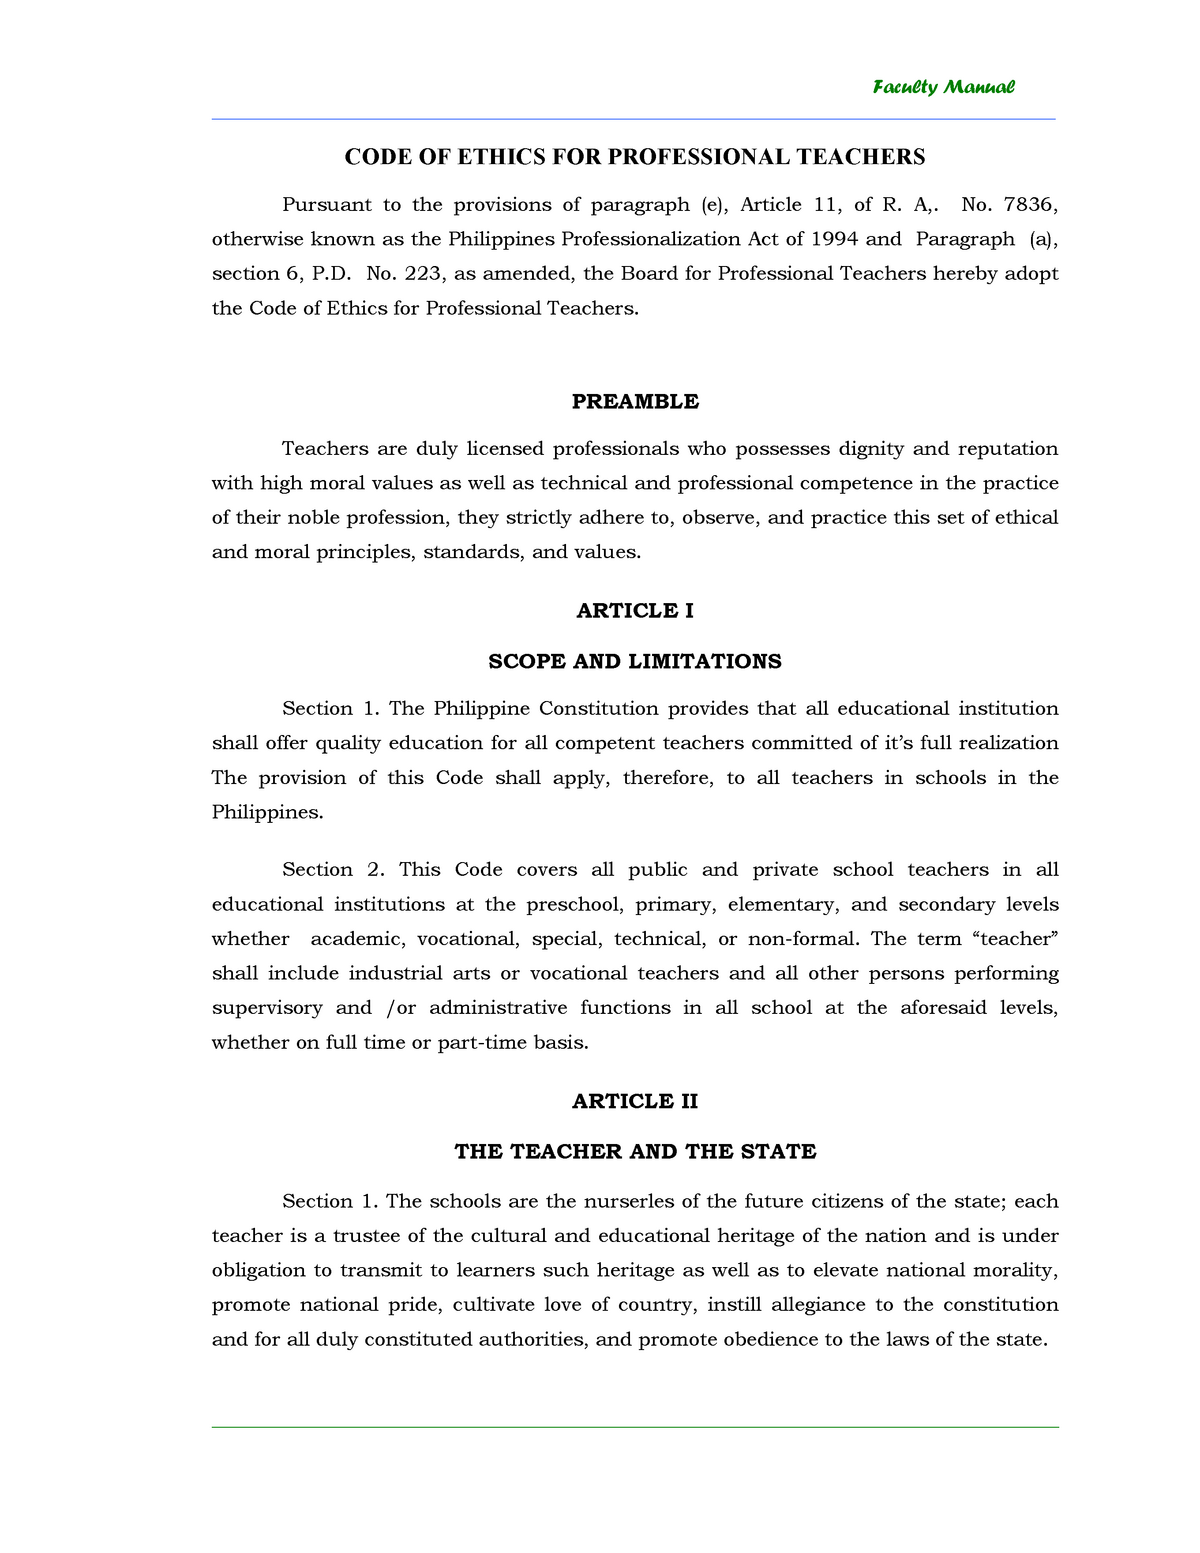 Sample Practice Exam Code Of Ethics For Professional Teachers Pursuant To The Provisions Of Paragraph Article 11 Of No 76 Otherwise Known As The Philippines Studocu